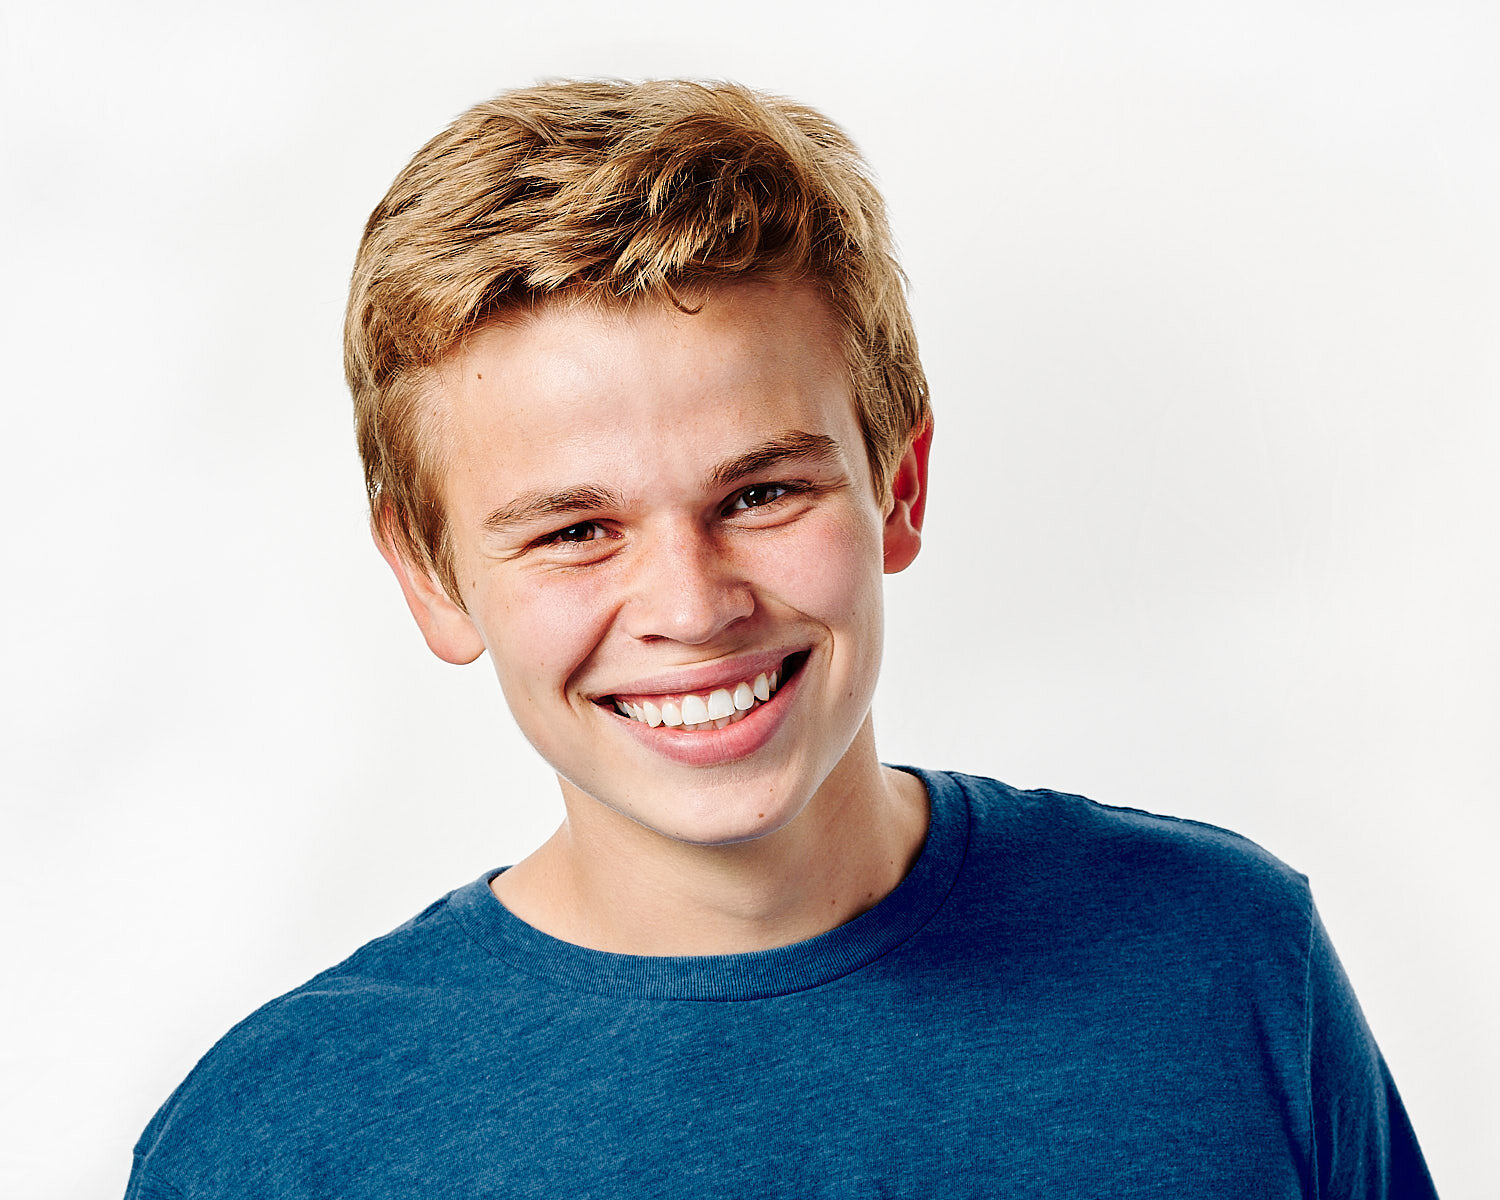  Max Peluso is posing for actor headshots against white background in a professional photography studio. He looks handsome and happy, he has blond hair and wears a blue t-shirt. 